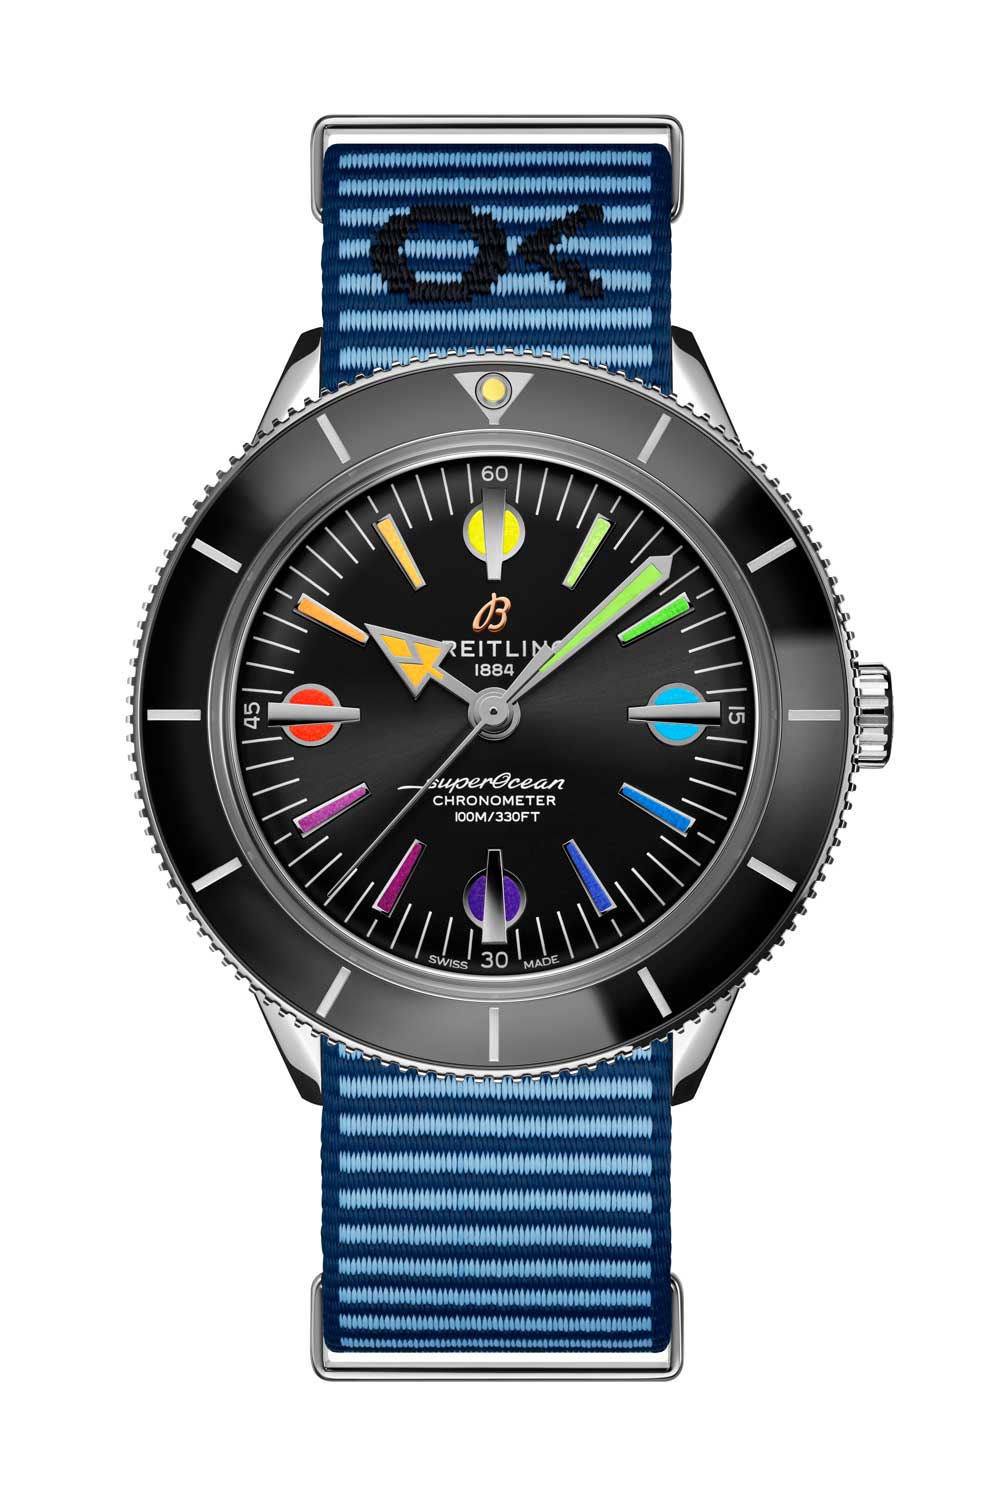 Superocean Heritage '57 Limited Edition